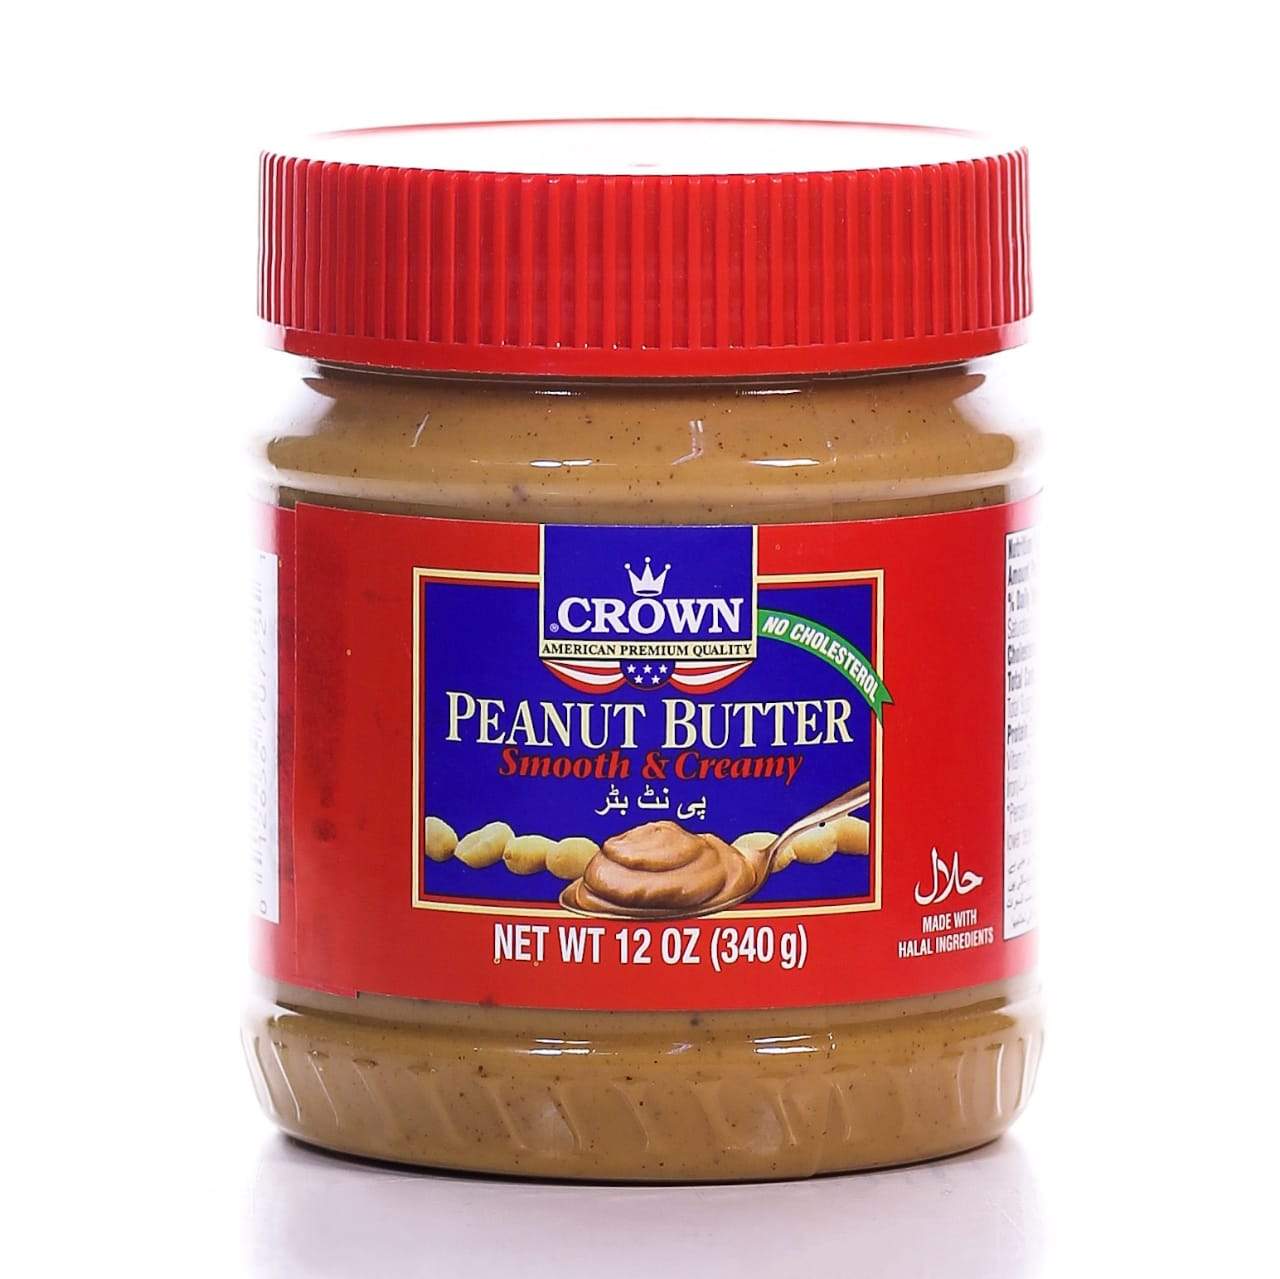 CROWN PEANUT BUTTER SMOOTH & CREAMY - 340 GM